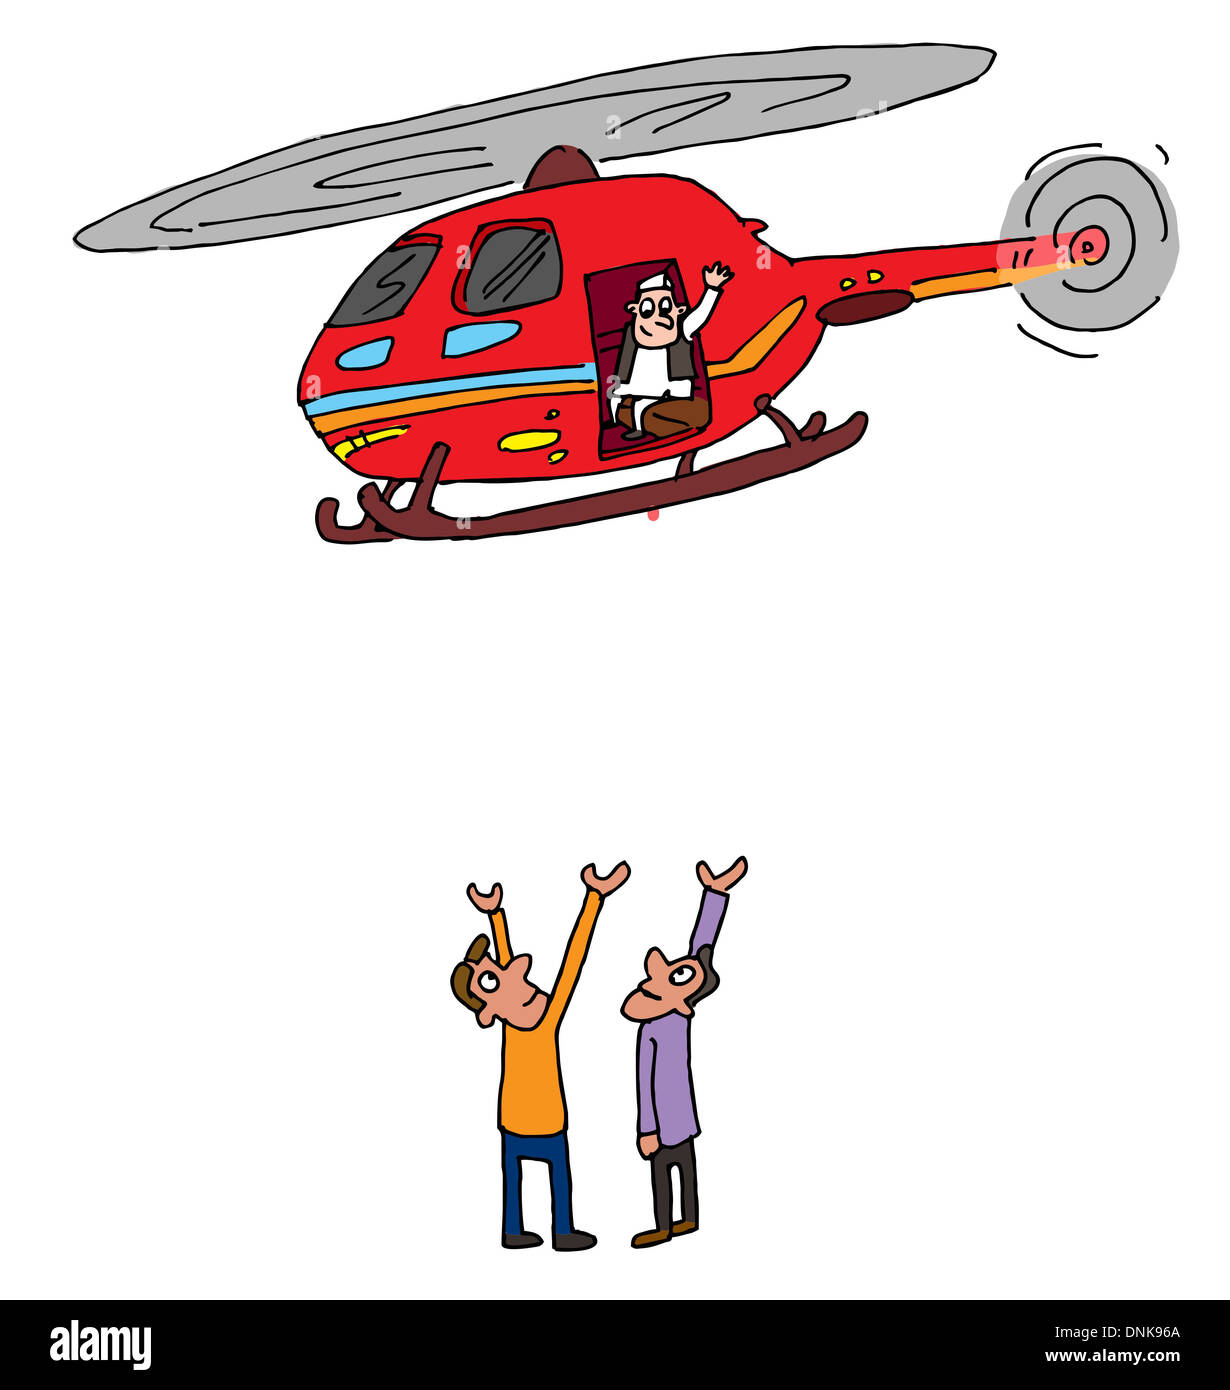 Illustrative representation of an Indian politician helicopter visit Stock Photo